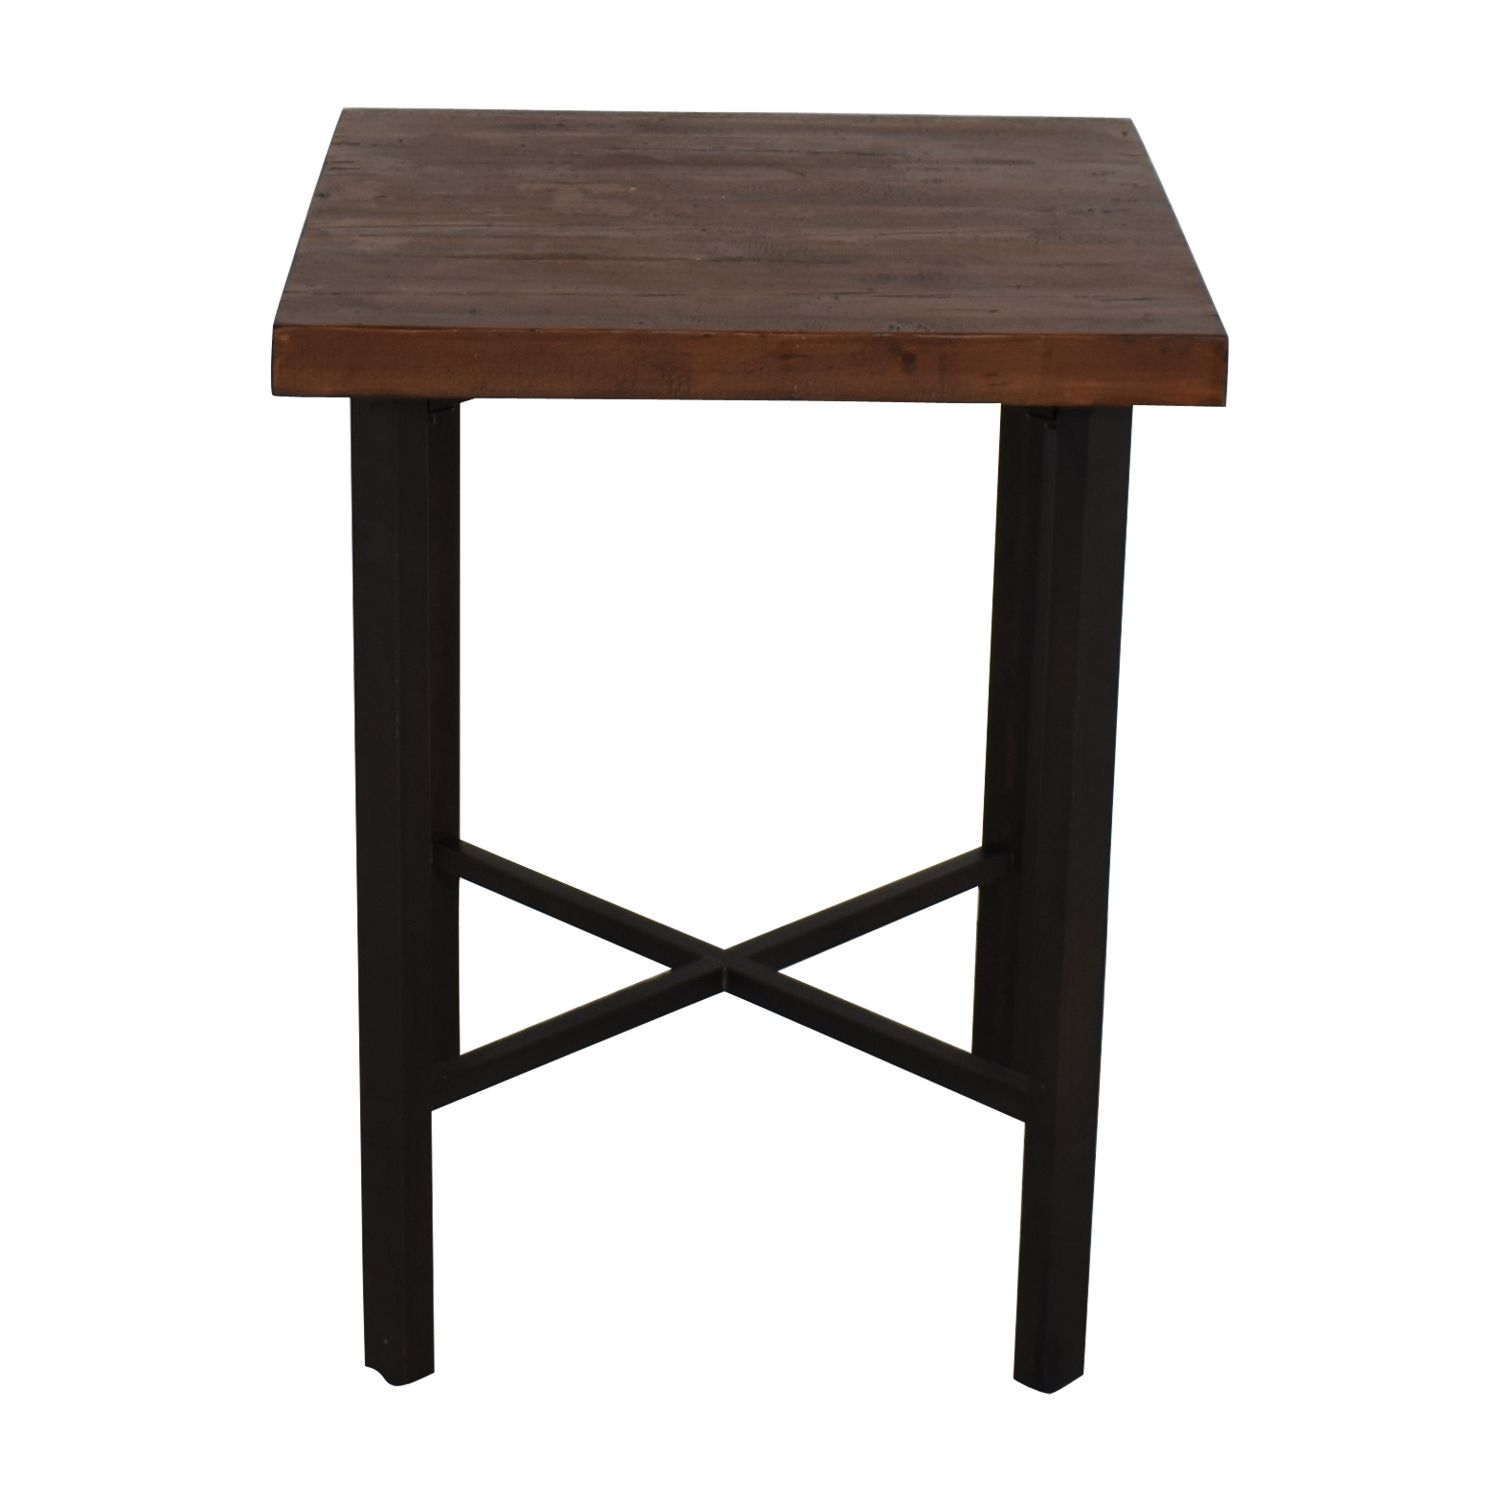 73% Off – Pottery Barn Pottery Barn Griffin Reclaimed Wood Bar Height Table  / Tables Regarding Latest Griffin Reclaimed Wood Bar Height Tables (Photo 1 of 25)